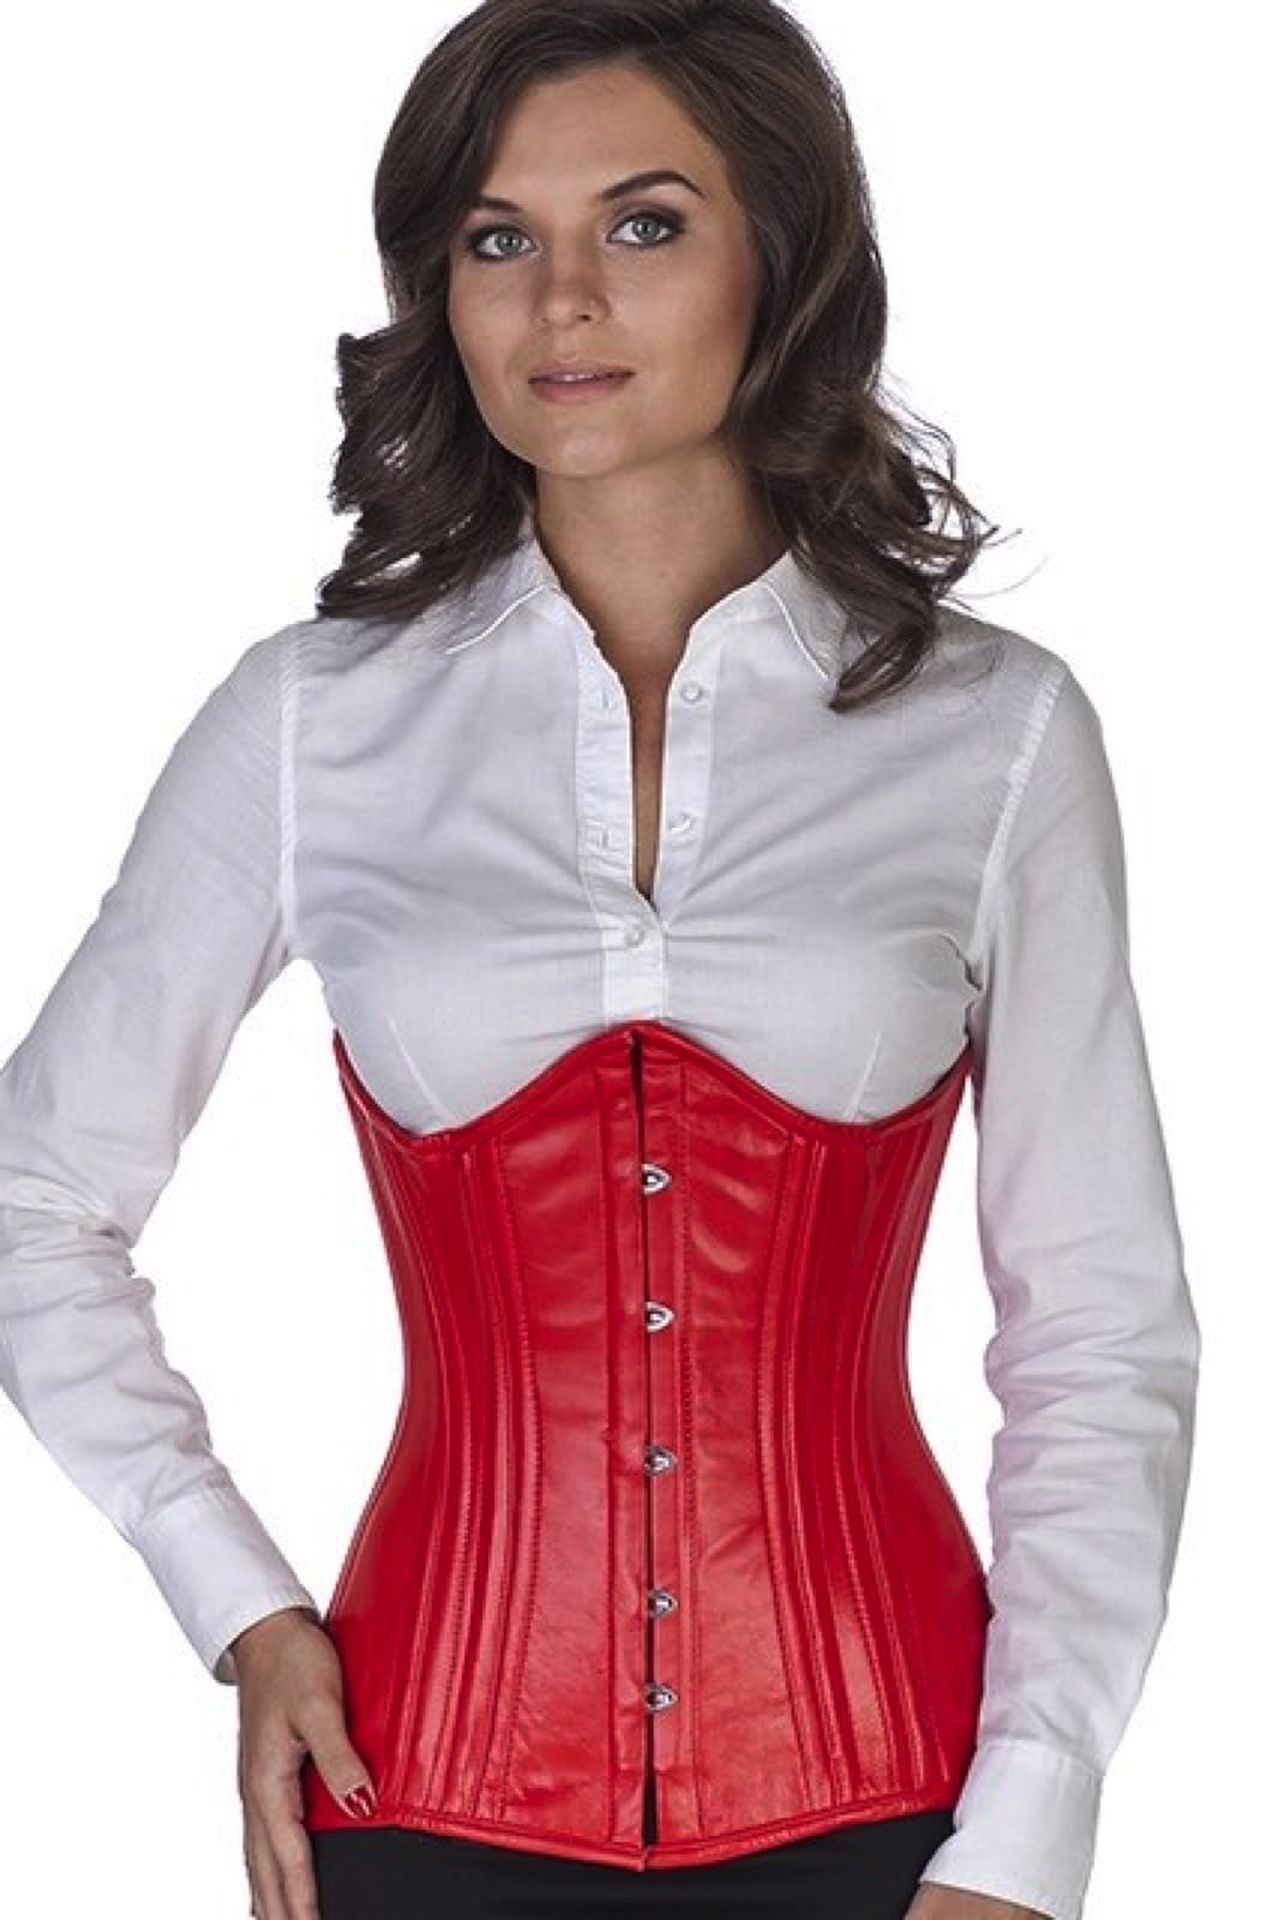 Corset red leather curved underbust ln23